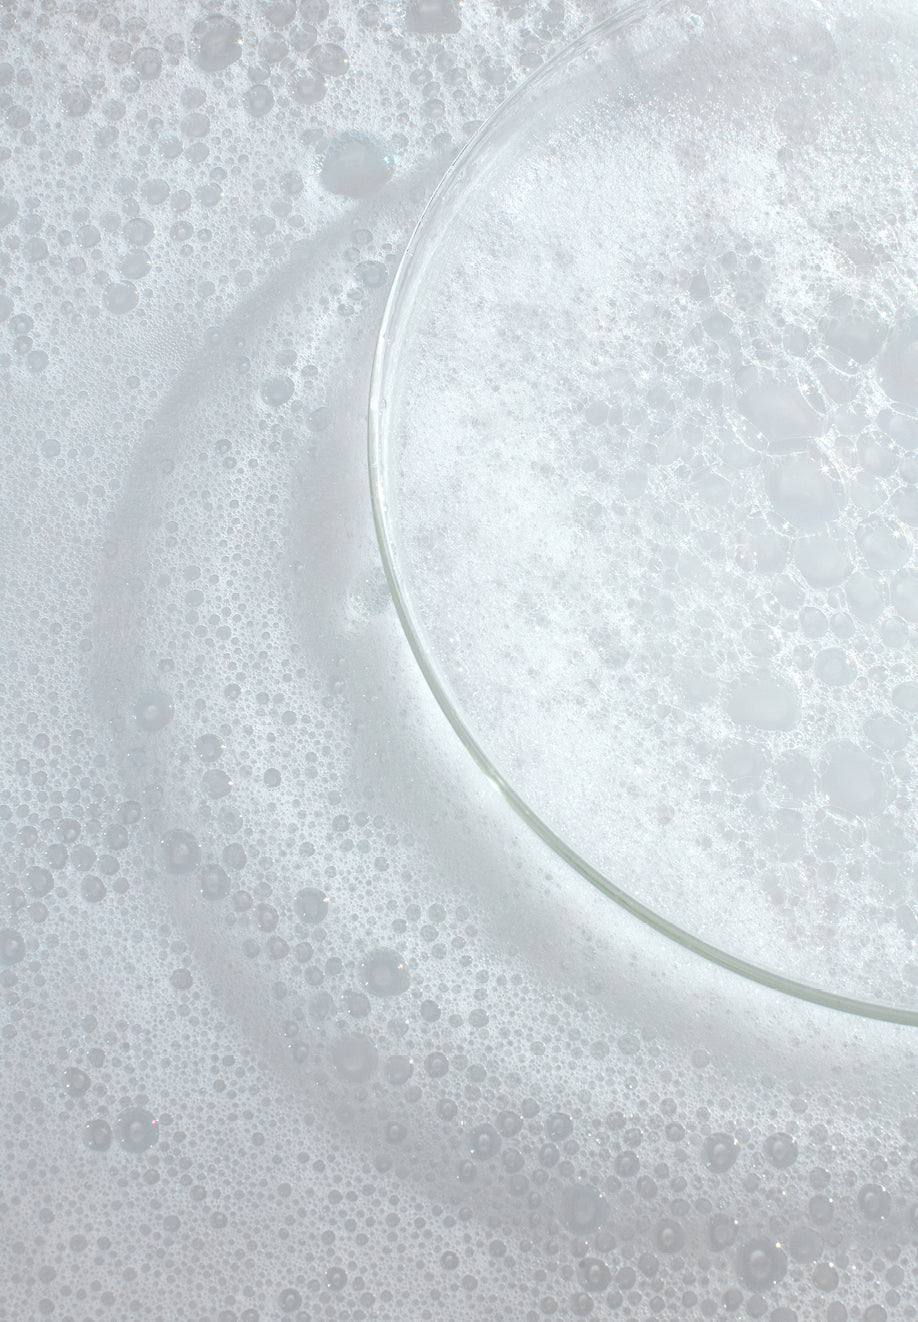 Product in petri dish floating on top of bubbly water.